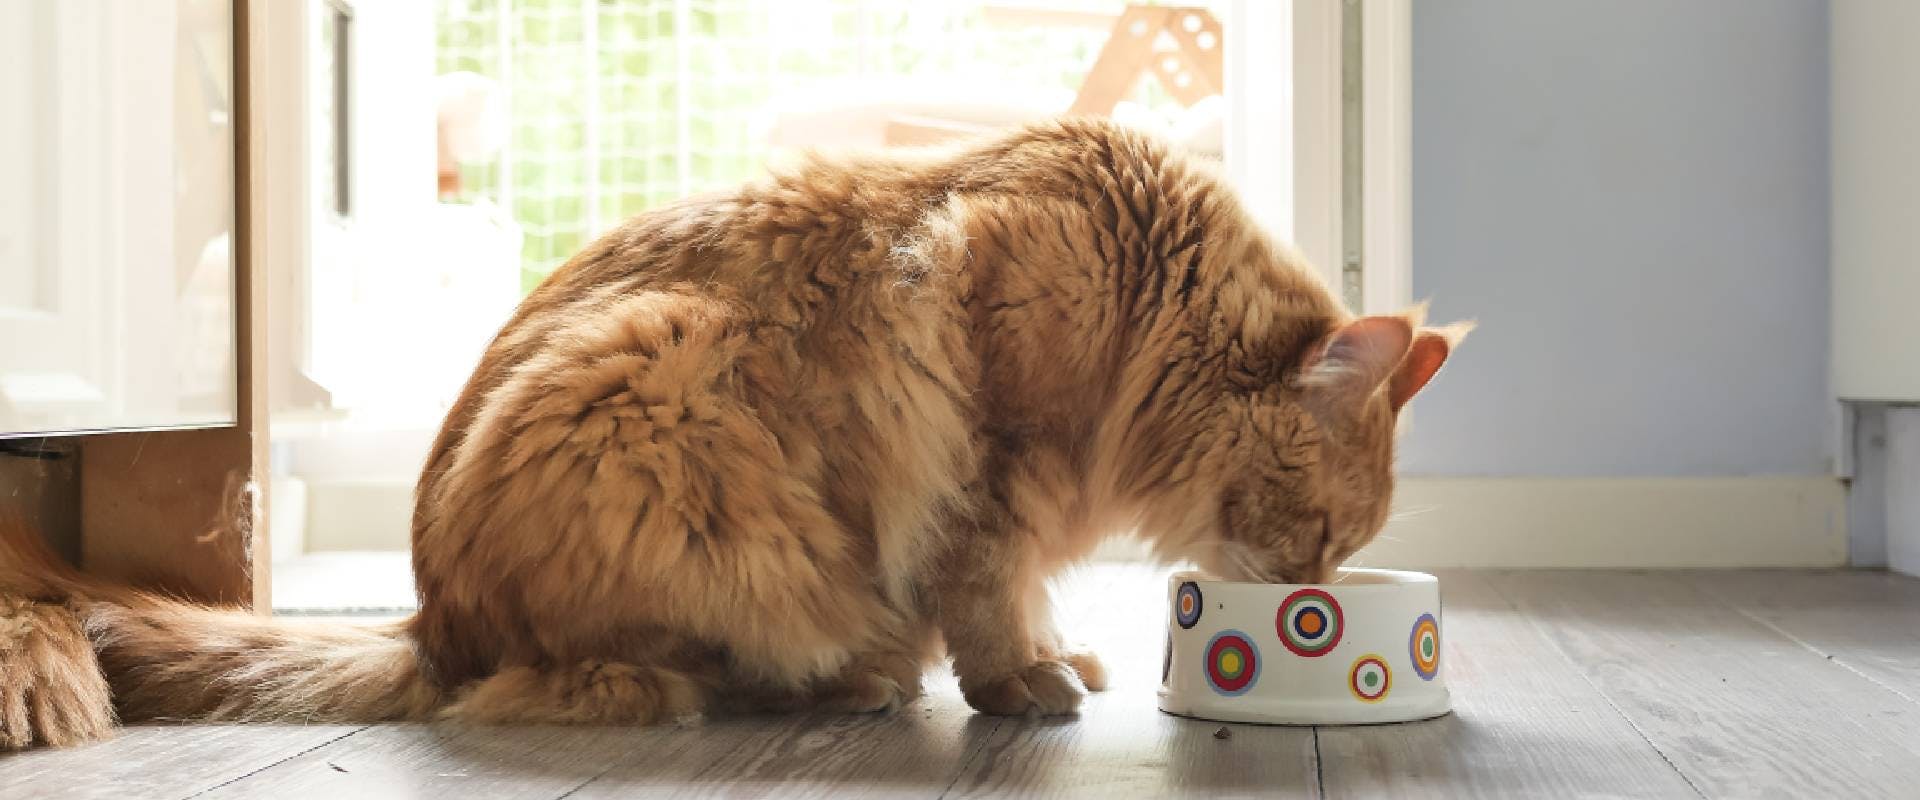 Ginger cat eating from a bowl